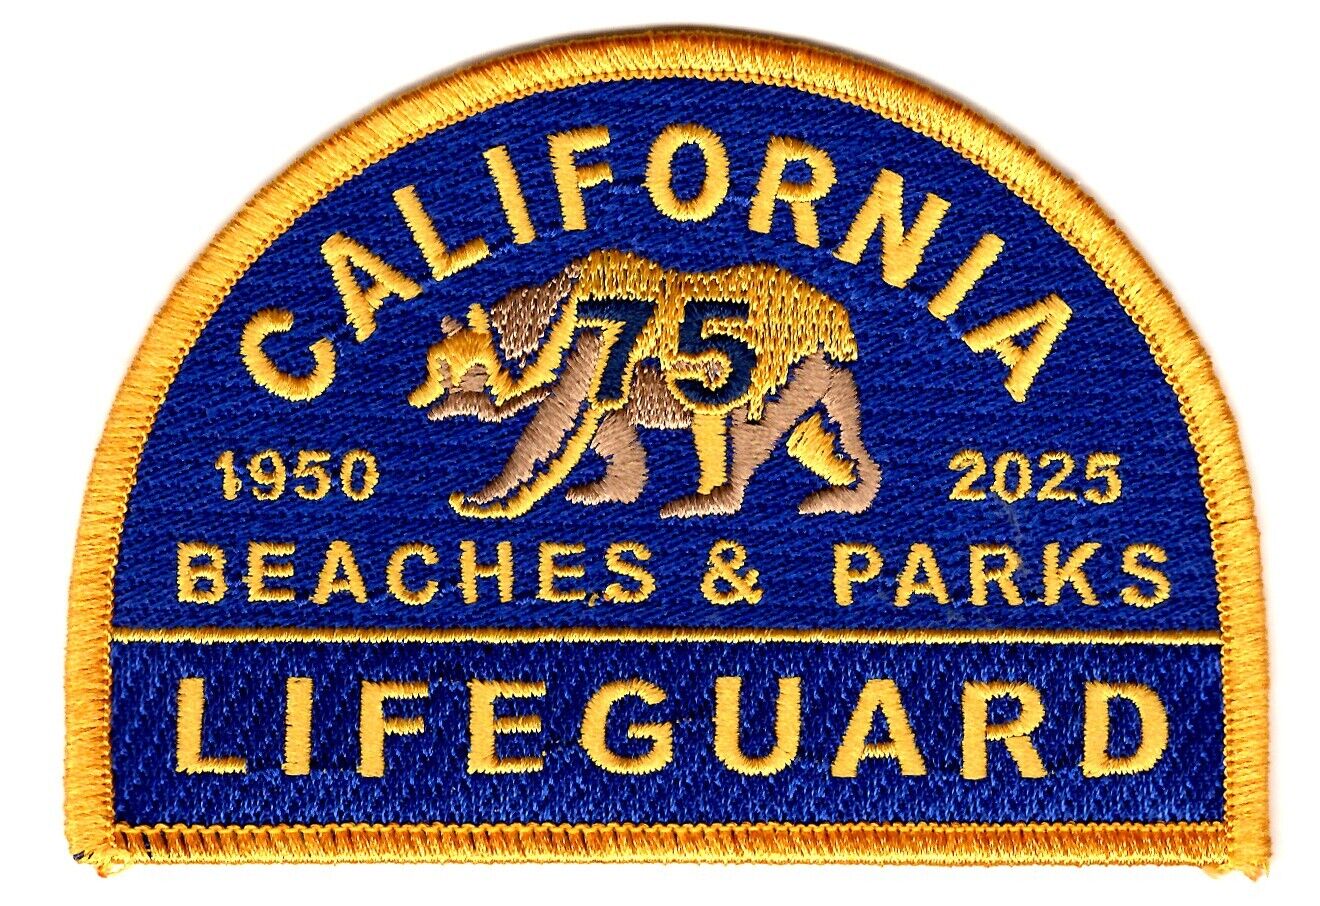 California State Parks Lifeguard - 75th Anniversary Beaches & Parks Patch 2025